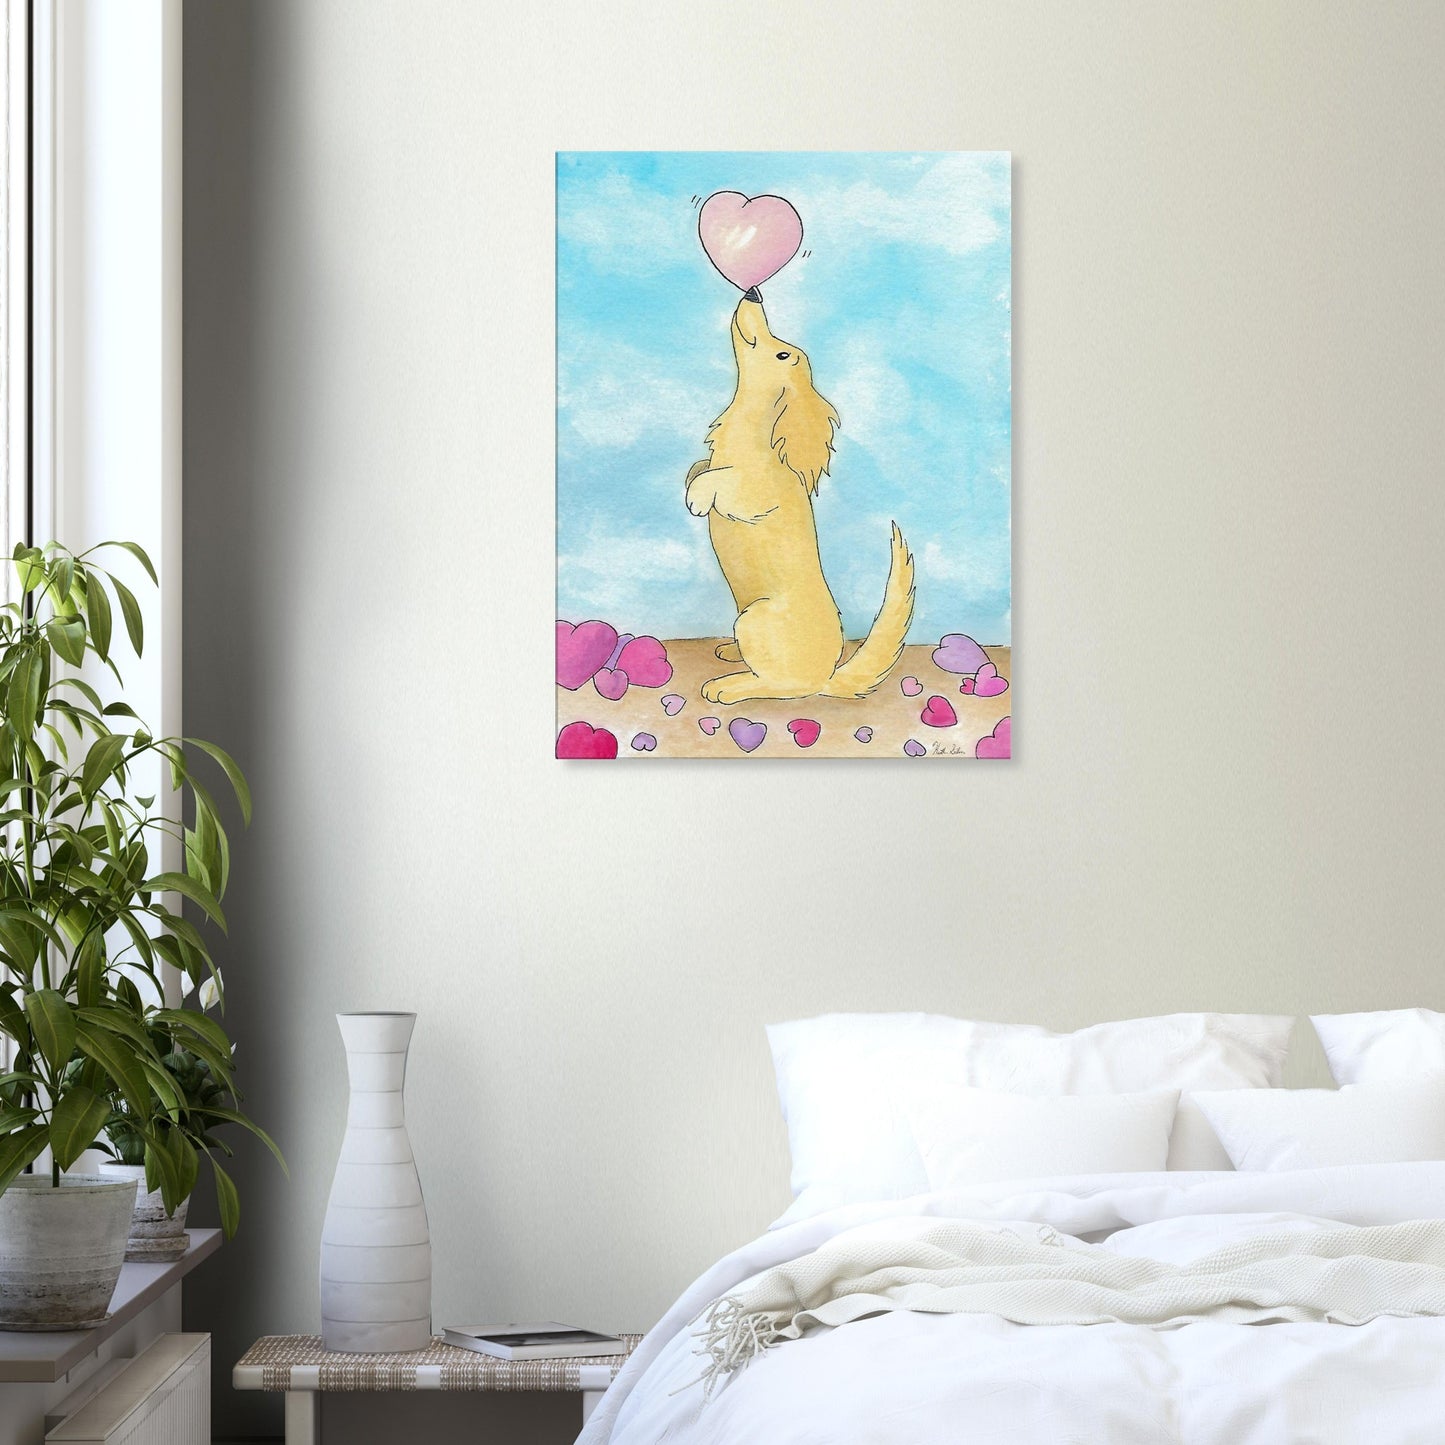 24 by 32 inch canvas wall art print of Heather Silver's watercolor painting, Puppy Love. It features a cute dog balancing a pink heart on its nose against a blue sky background. Canvas shown on wall above white bed with nightstand and potted plant.